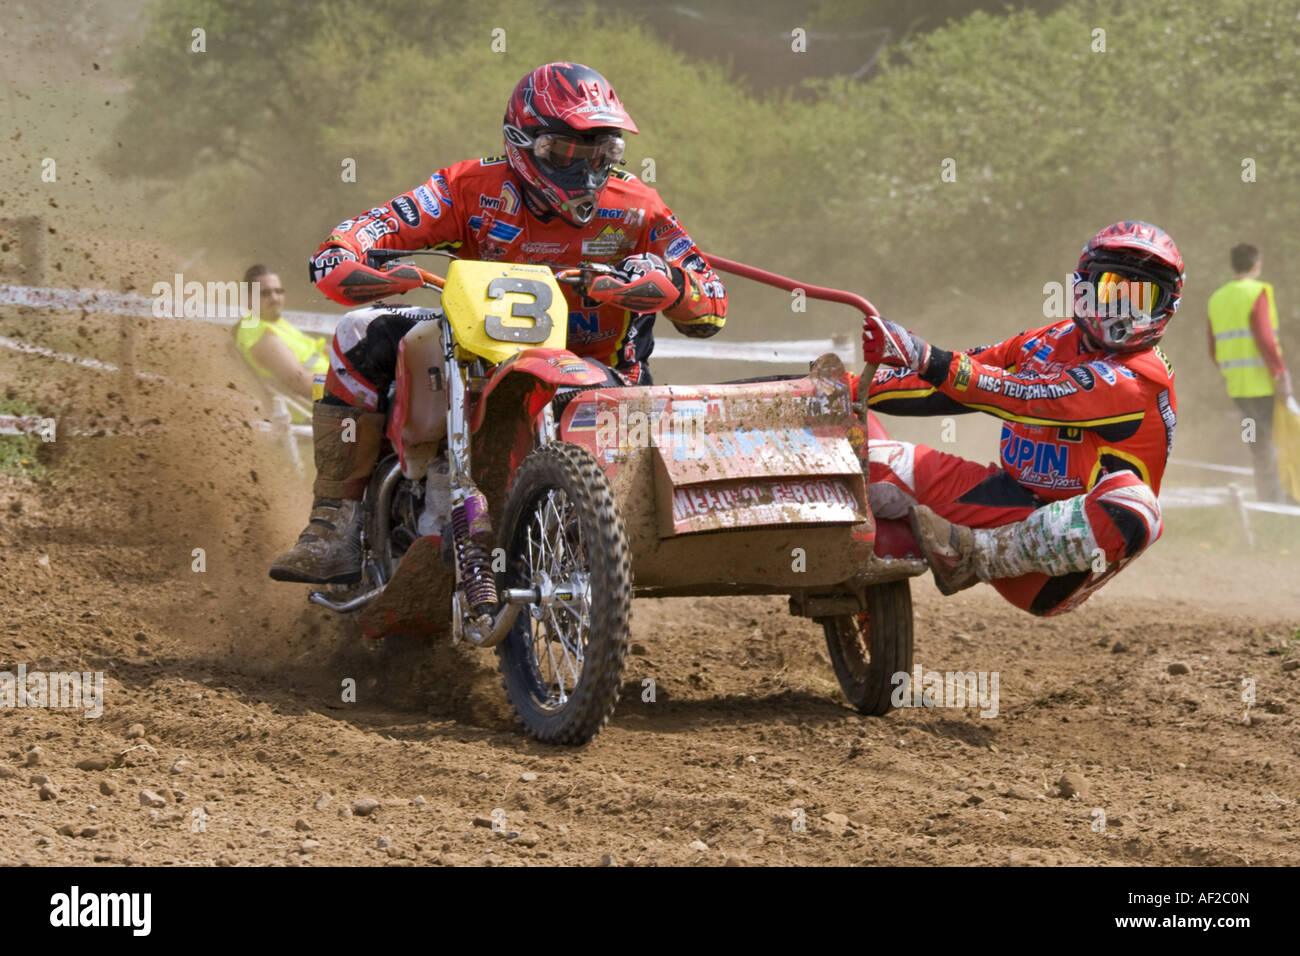 motorbike with side car during a race, Germany Stock Photo